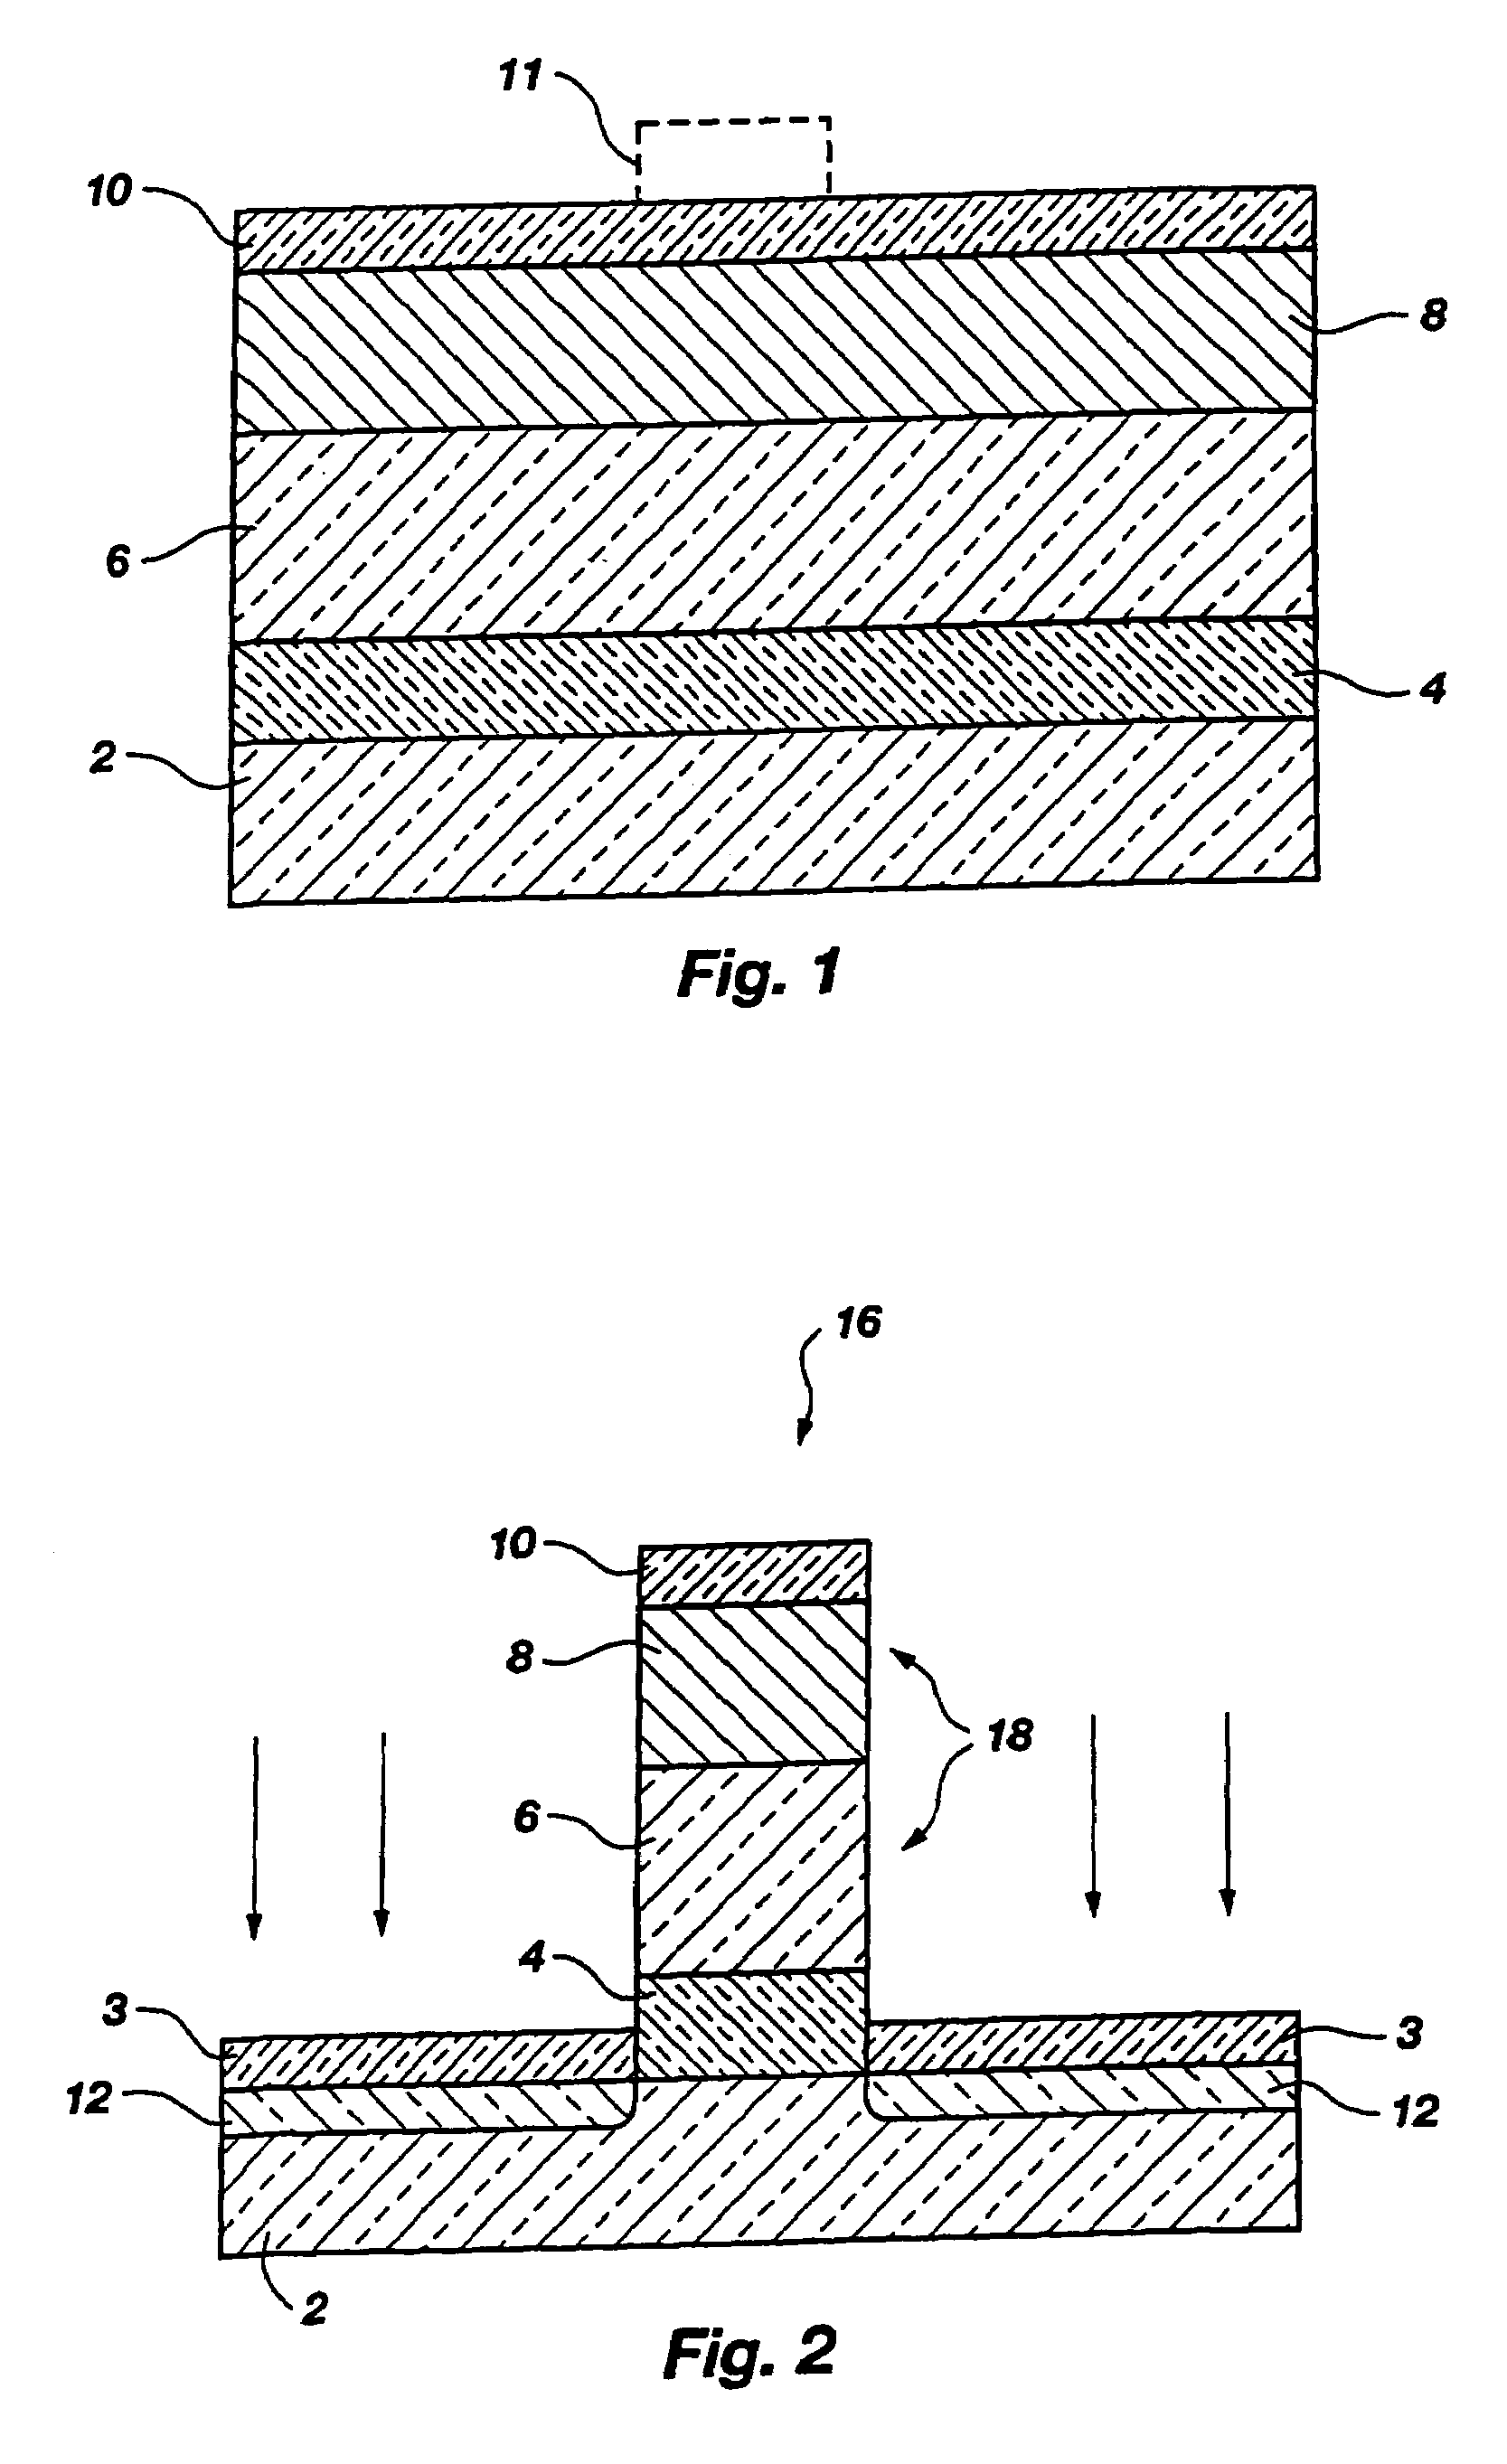 Ion-assisted oxidation methods and the resulting structures